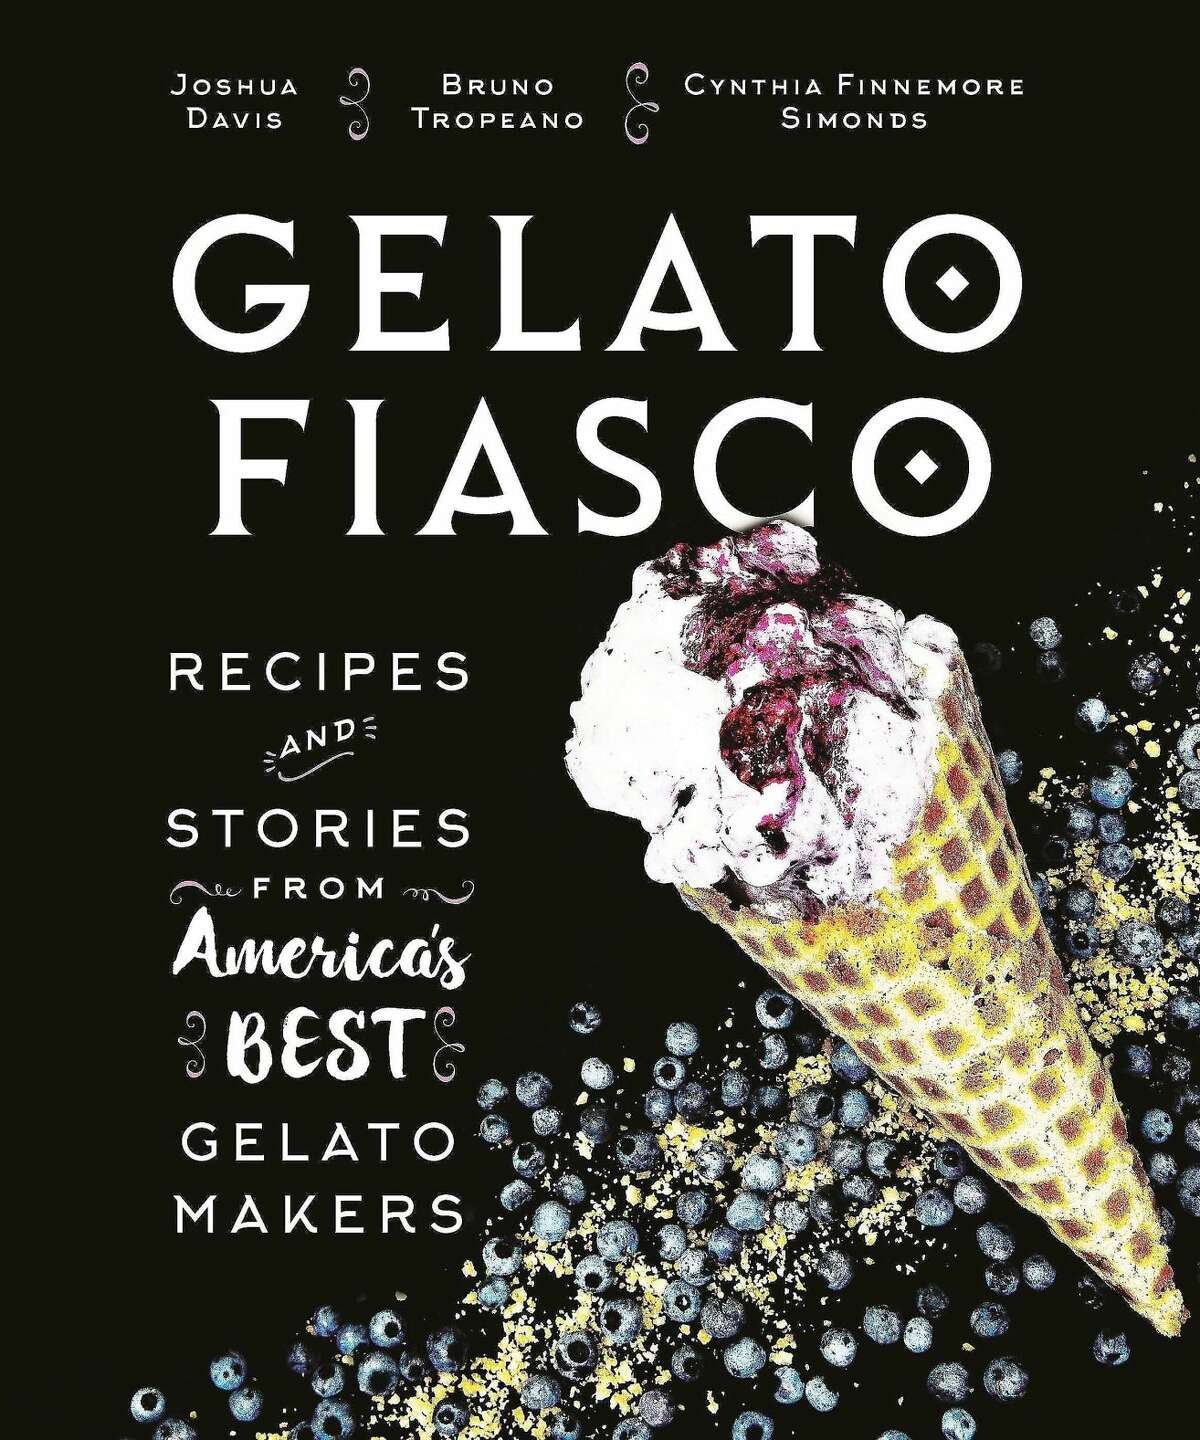 “Gelato Fiasco: Recipes and Stories from America’s Best Gelato Makers”